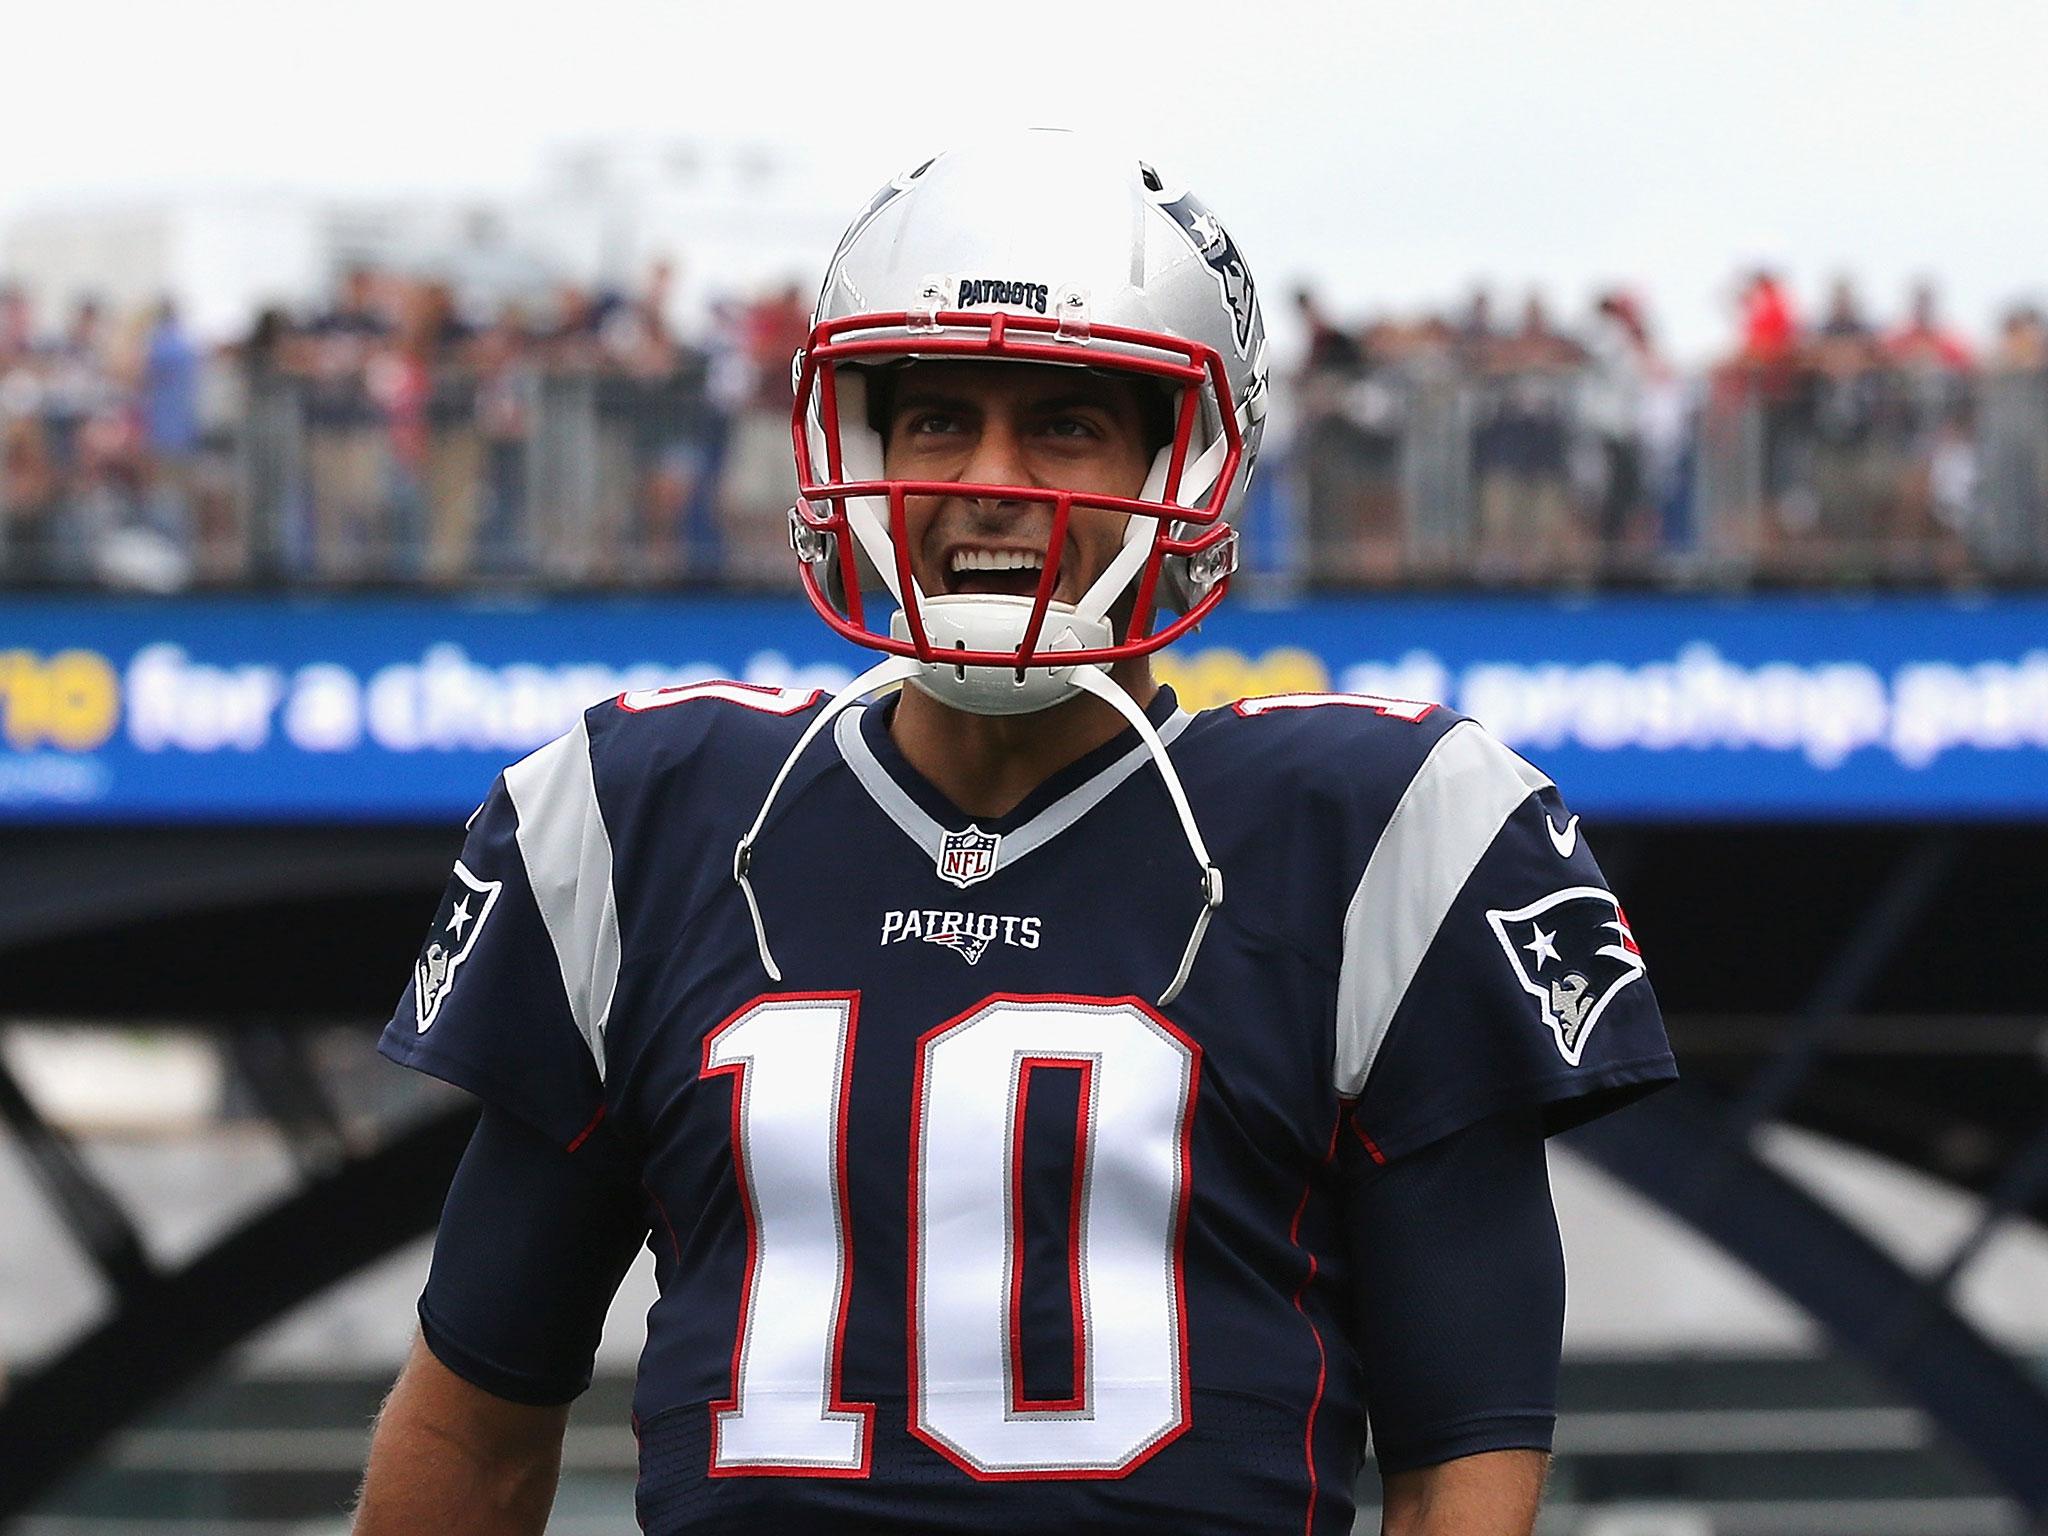 Jimmy Garoppolo announced he is leaving the New England Patriots in the early hours of Friday morning